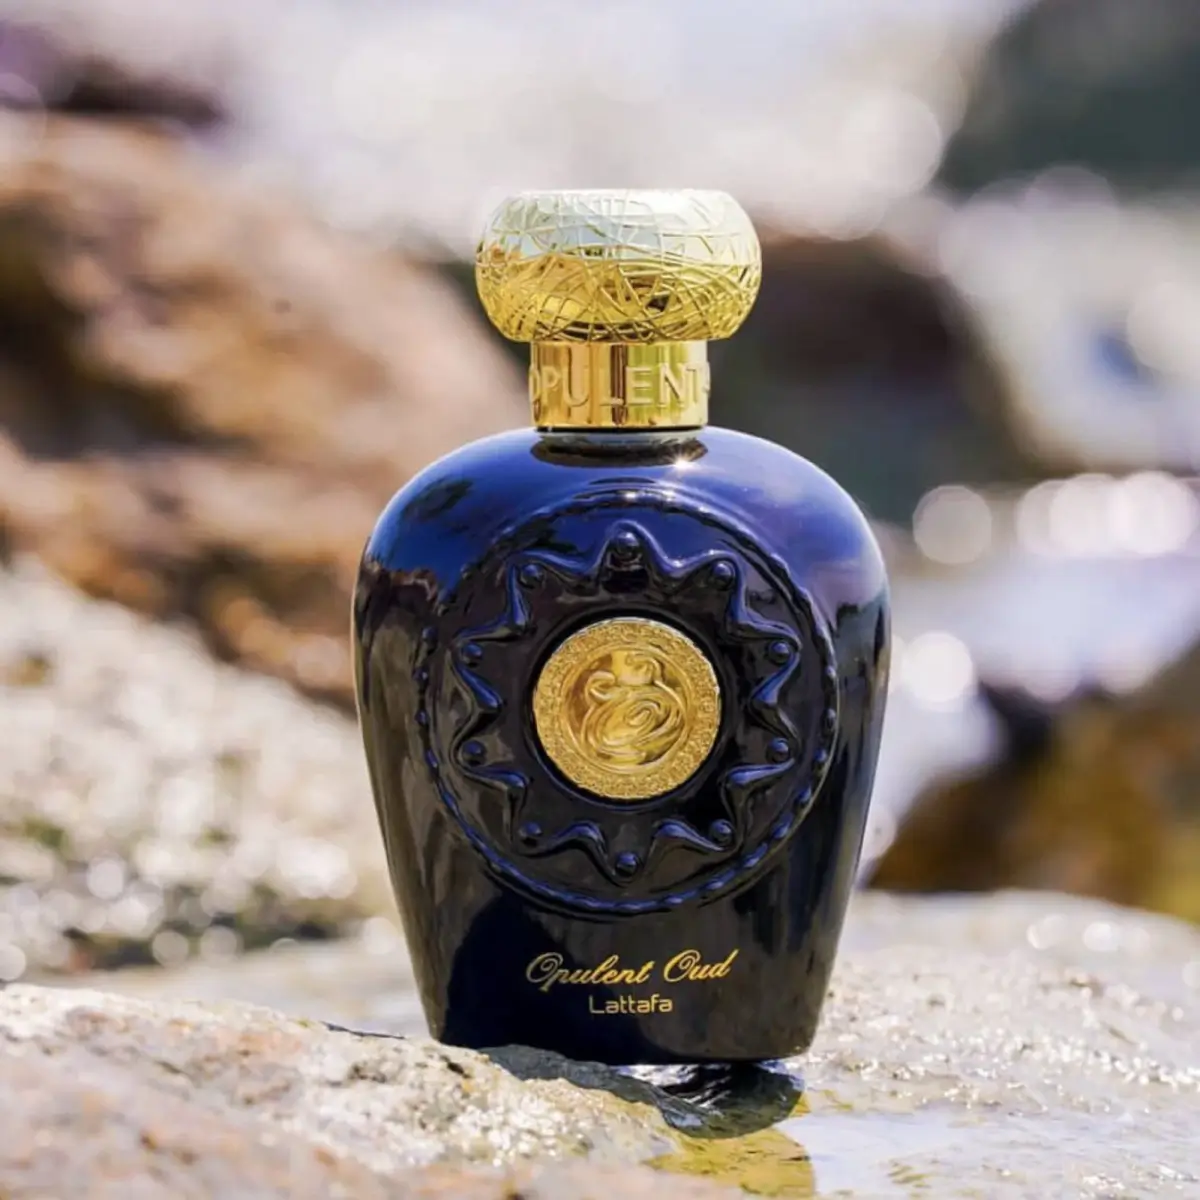 Oud Unveiled: A Glimpse into the World of Women’s Oud Fragrances